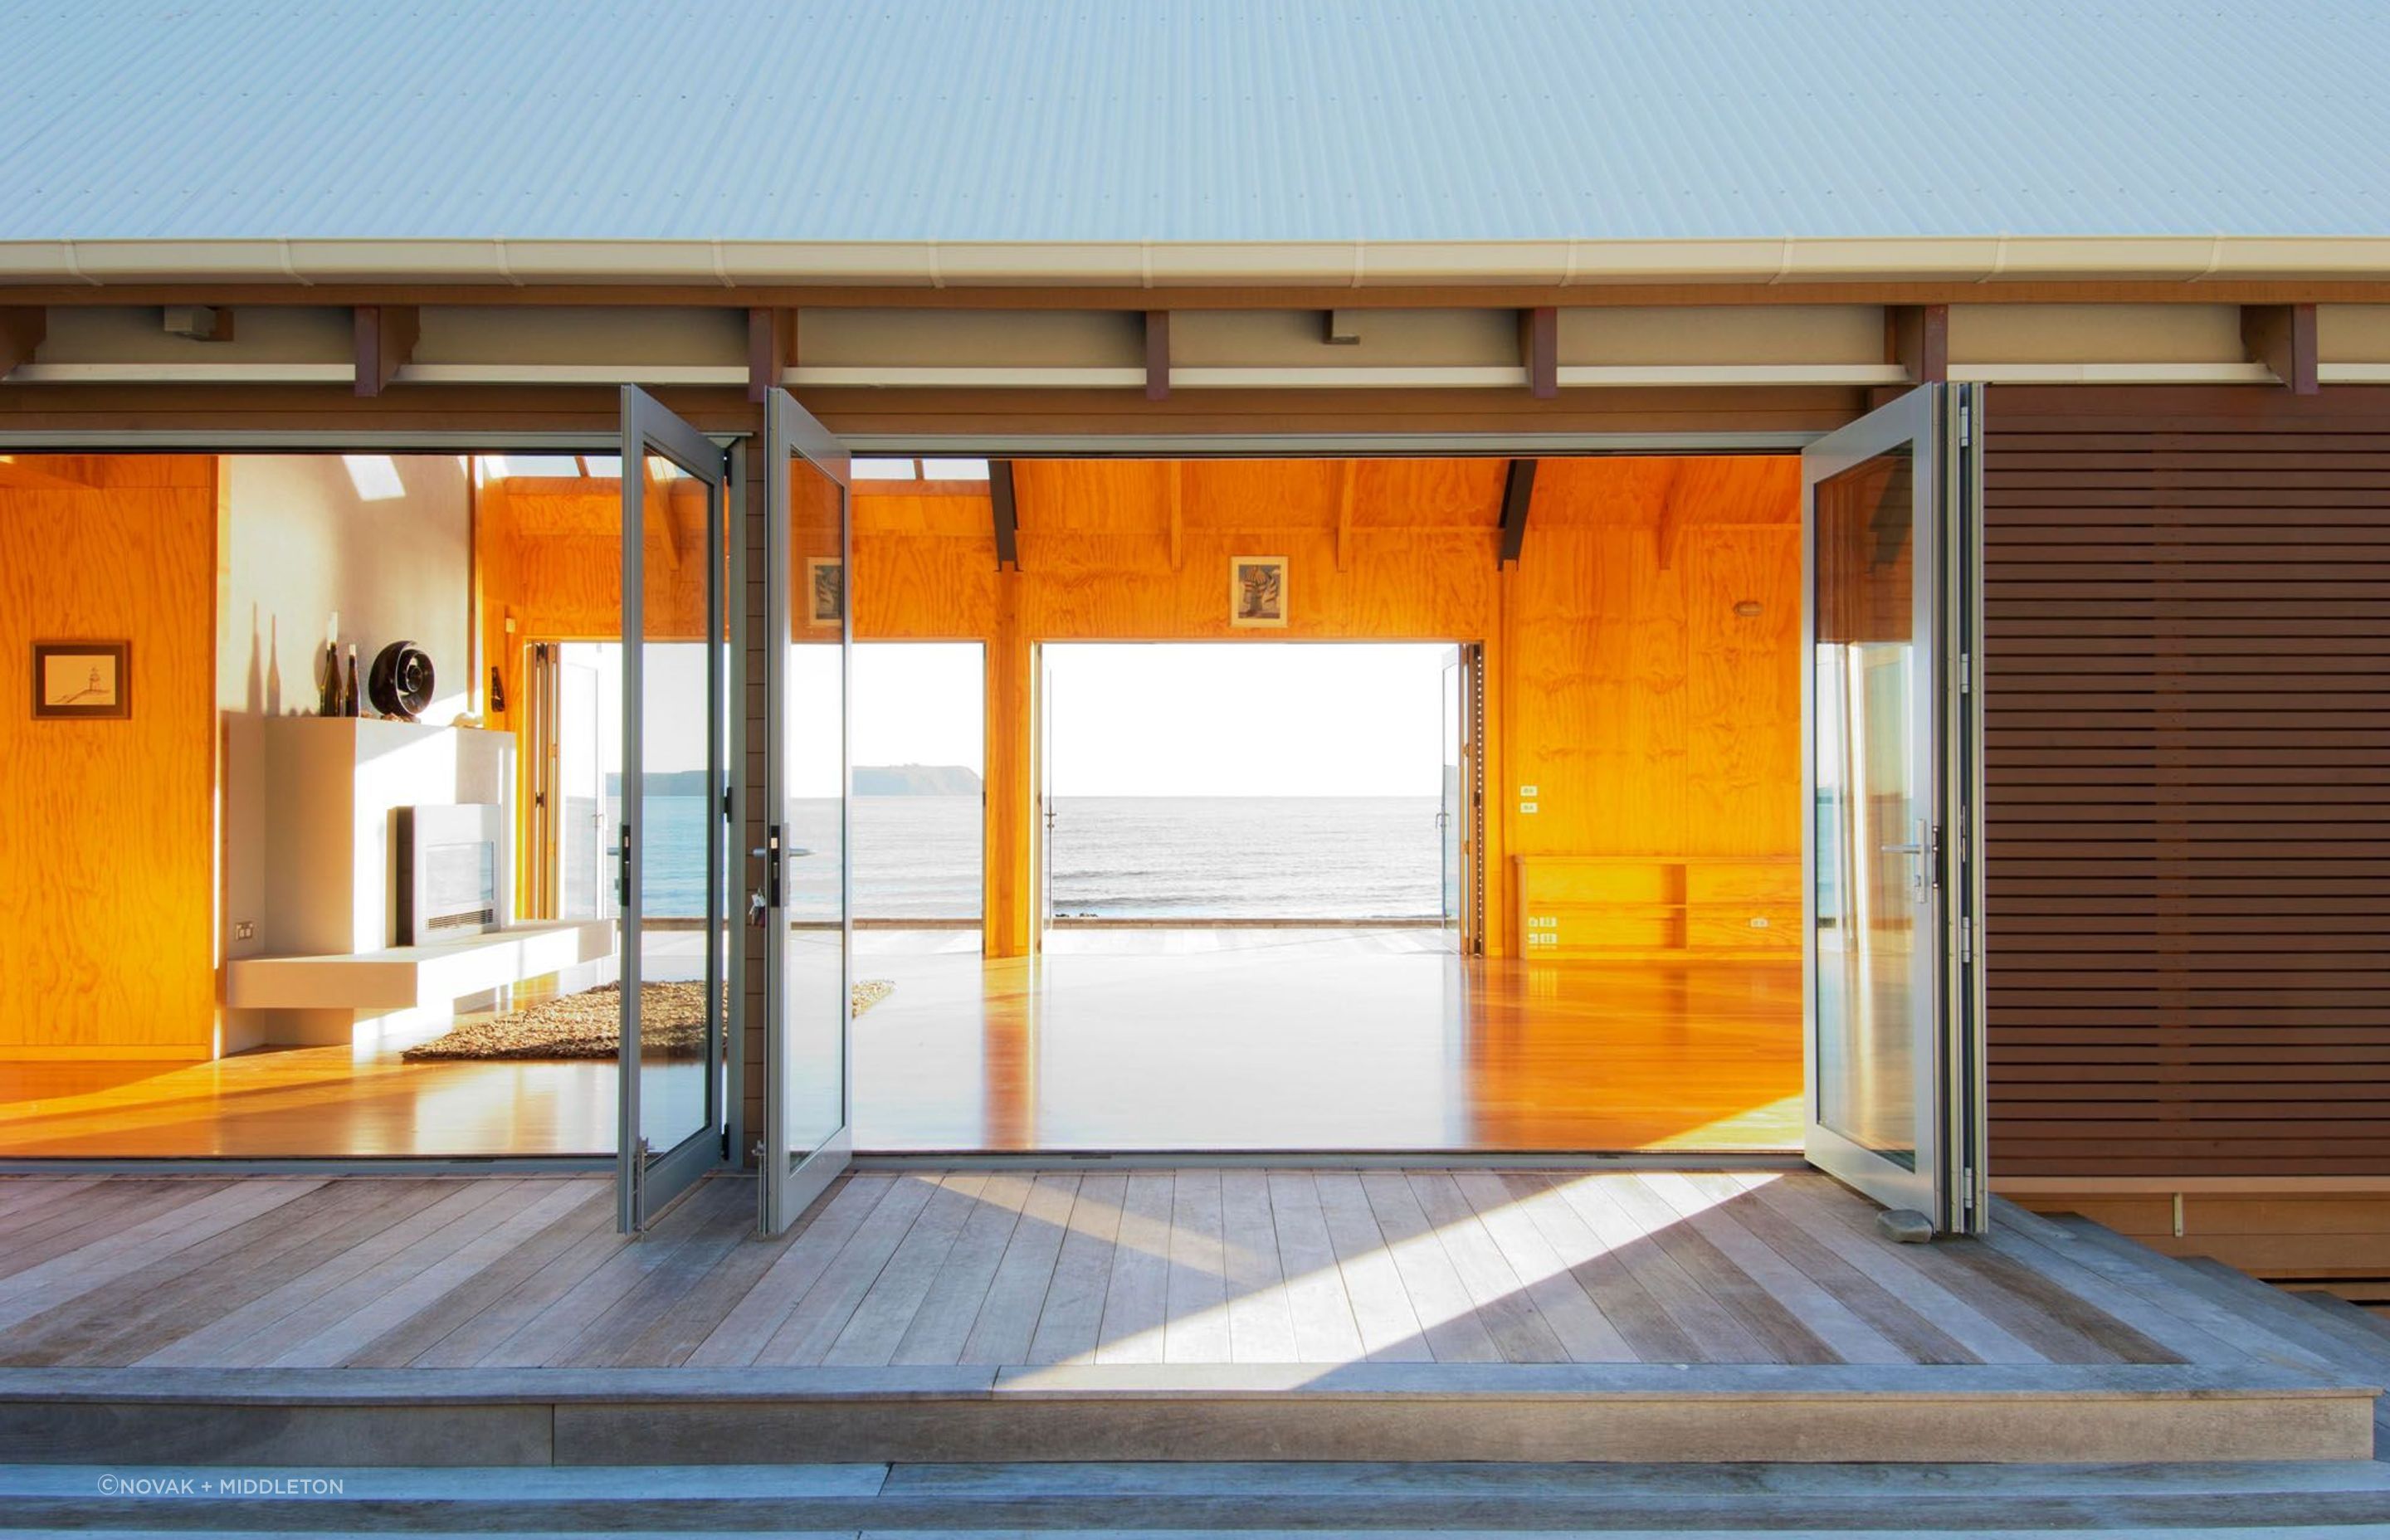 Sliding doors allow the vistas to become part of this tiny home